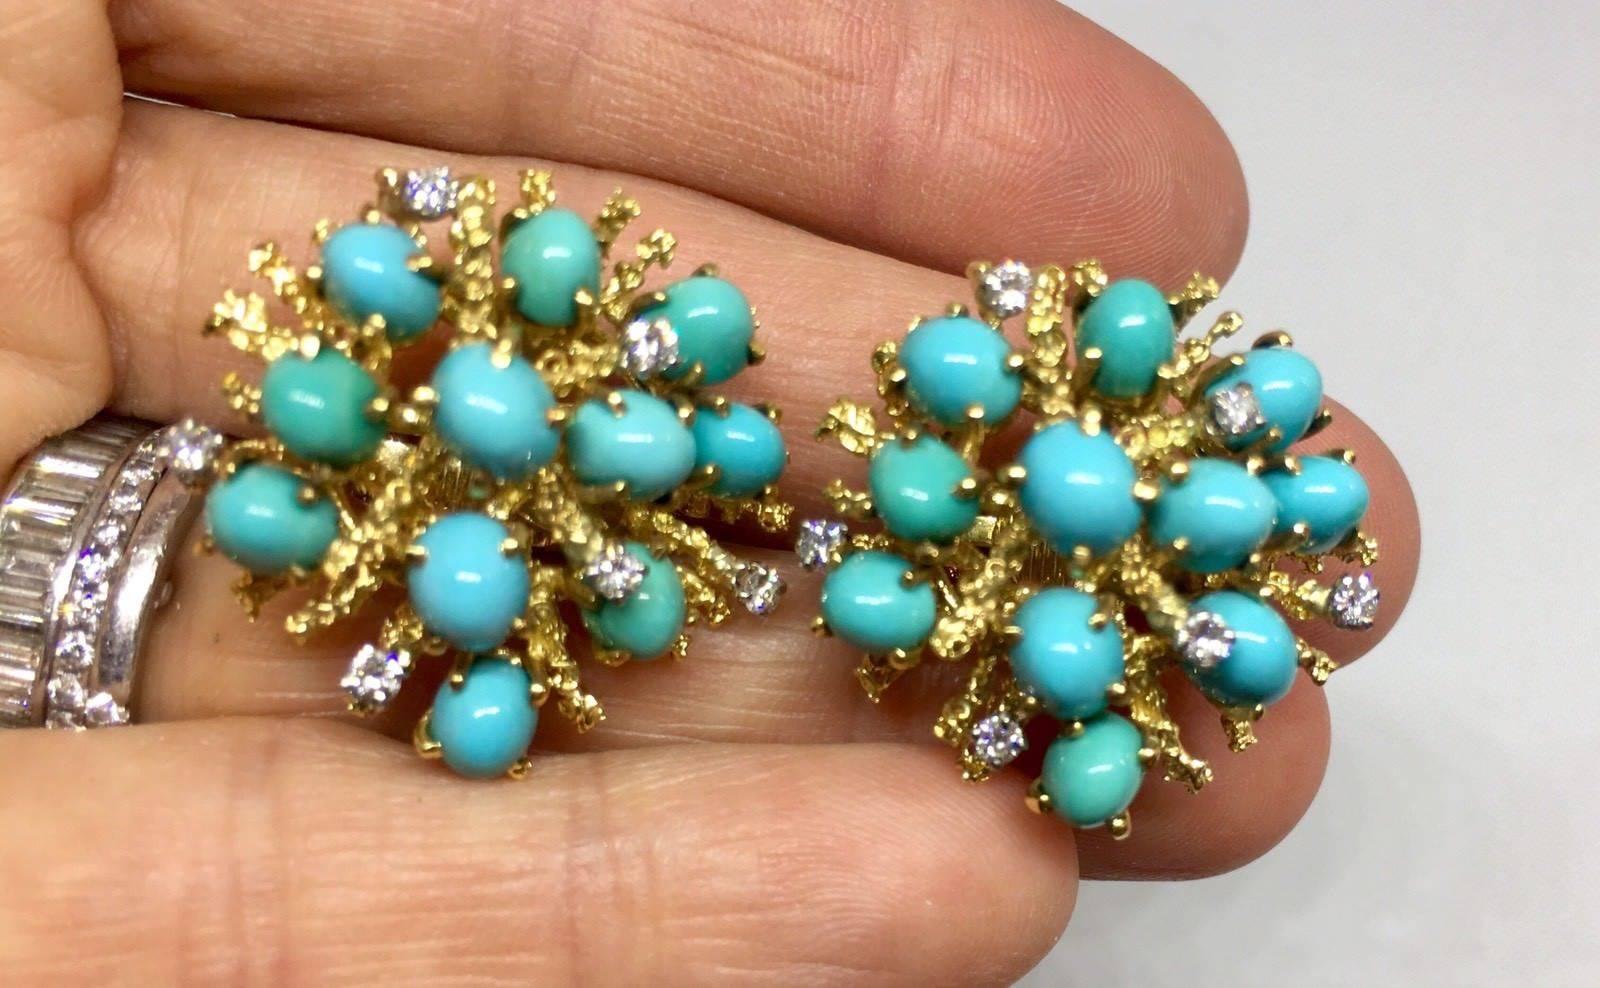 Impressive 1950s Turquoise Diamond 18k Gold Clip Back Earrings from Designer George Schuler (Preformed Parts).  These beautiful 18k yellow gold turquoise diamond  clipback earrings are set in anemone-form mount with six roud brilliant cut VS quality